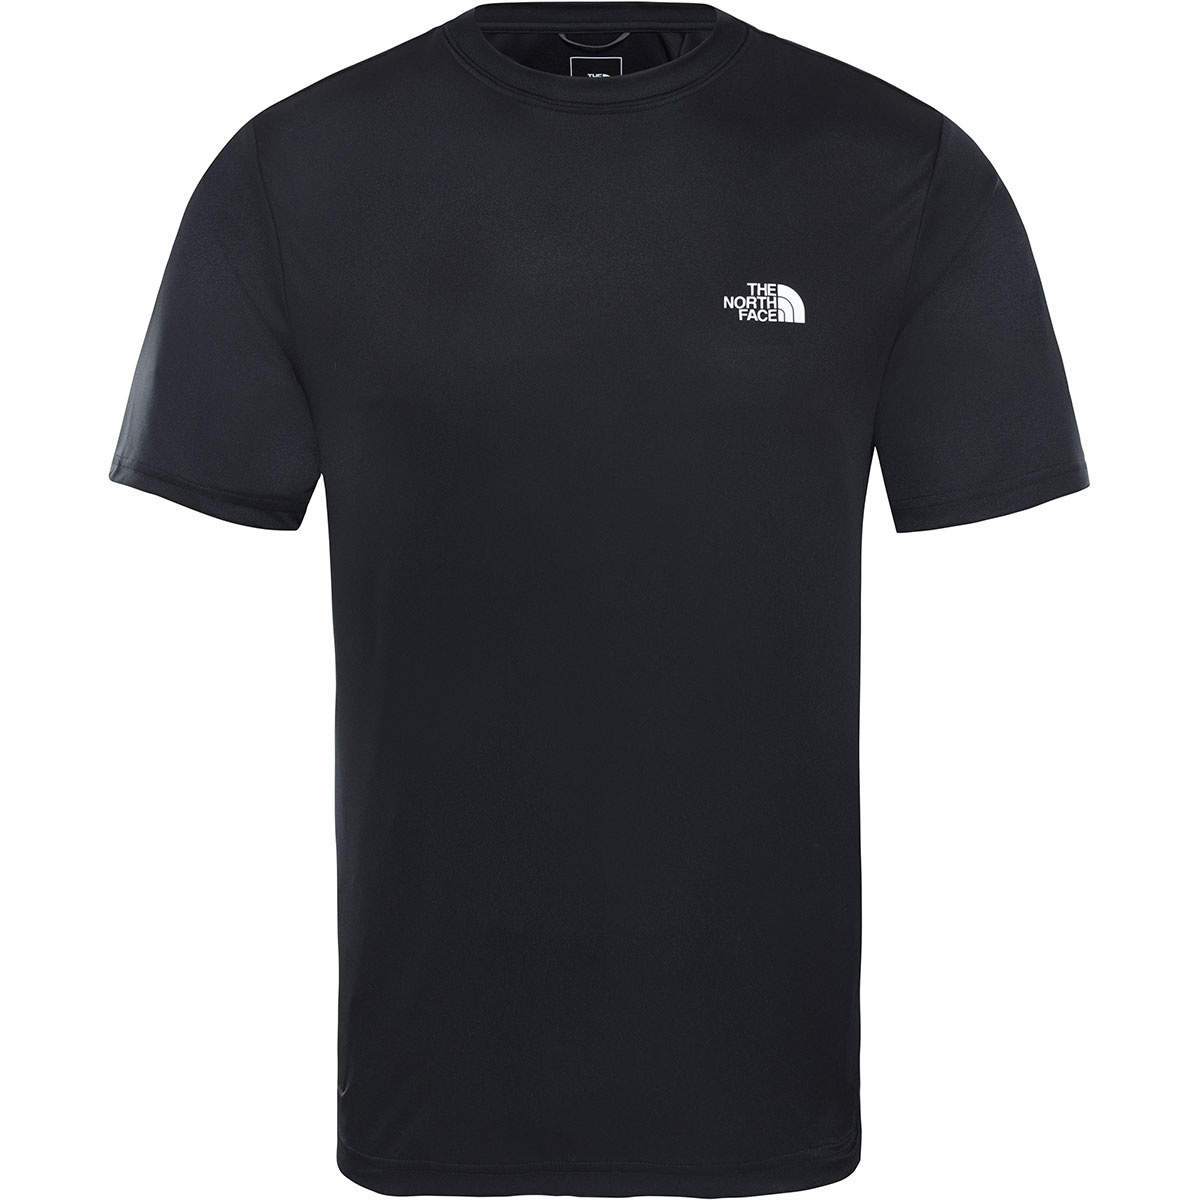 The North Face Herren Reaxion Amp T-Shirt von The North Face